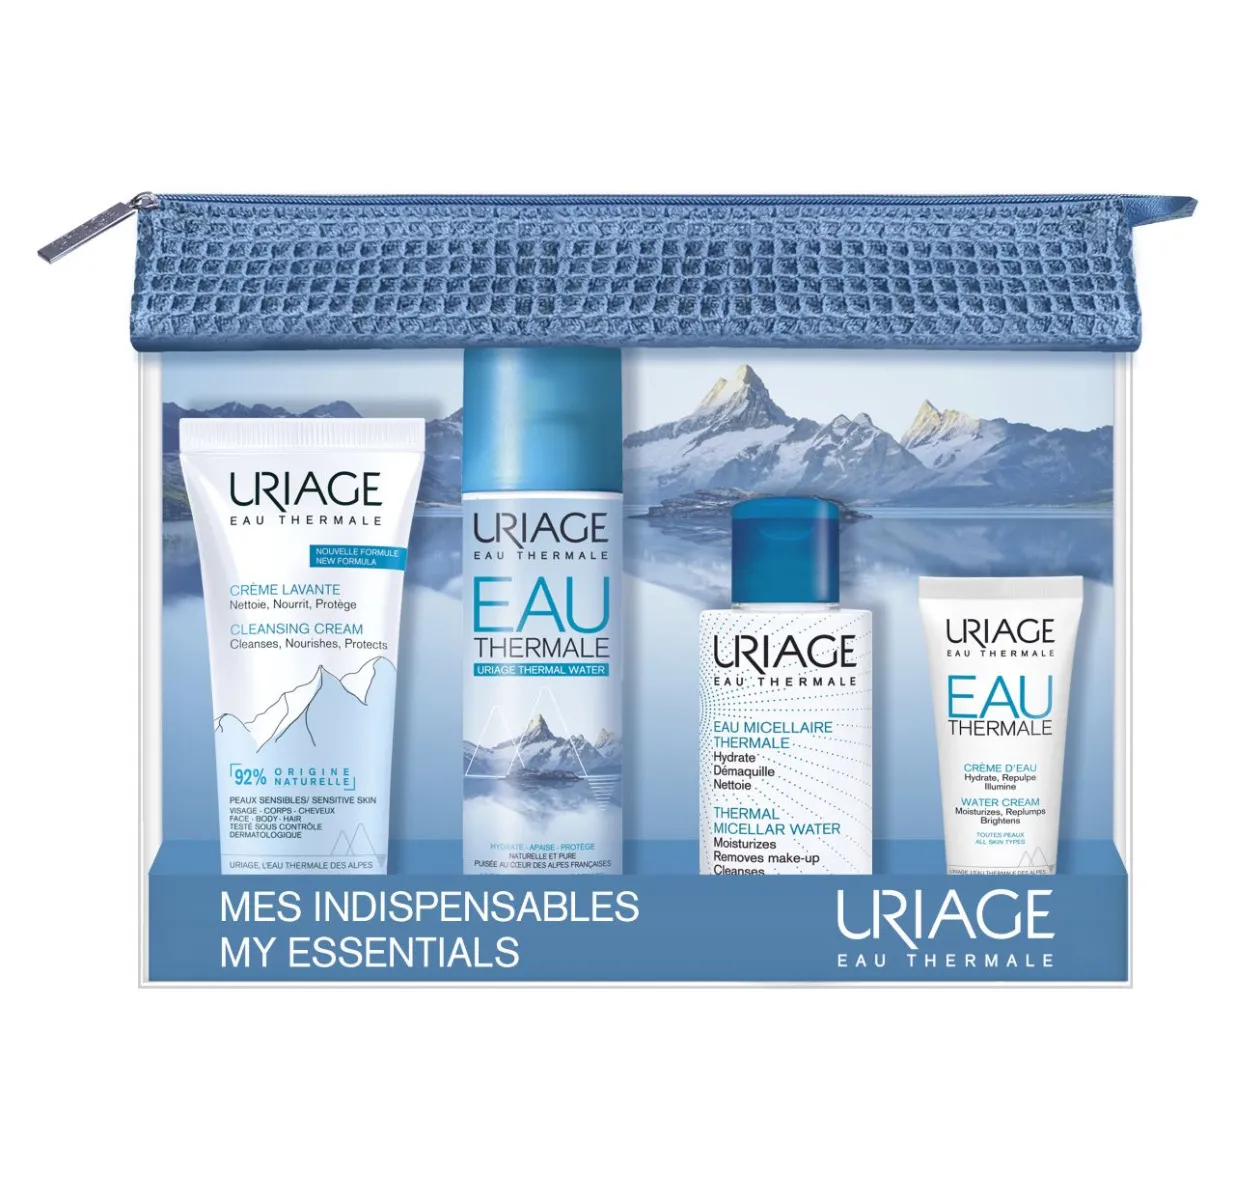 Uriage EAU Thermale Travel Kit